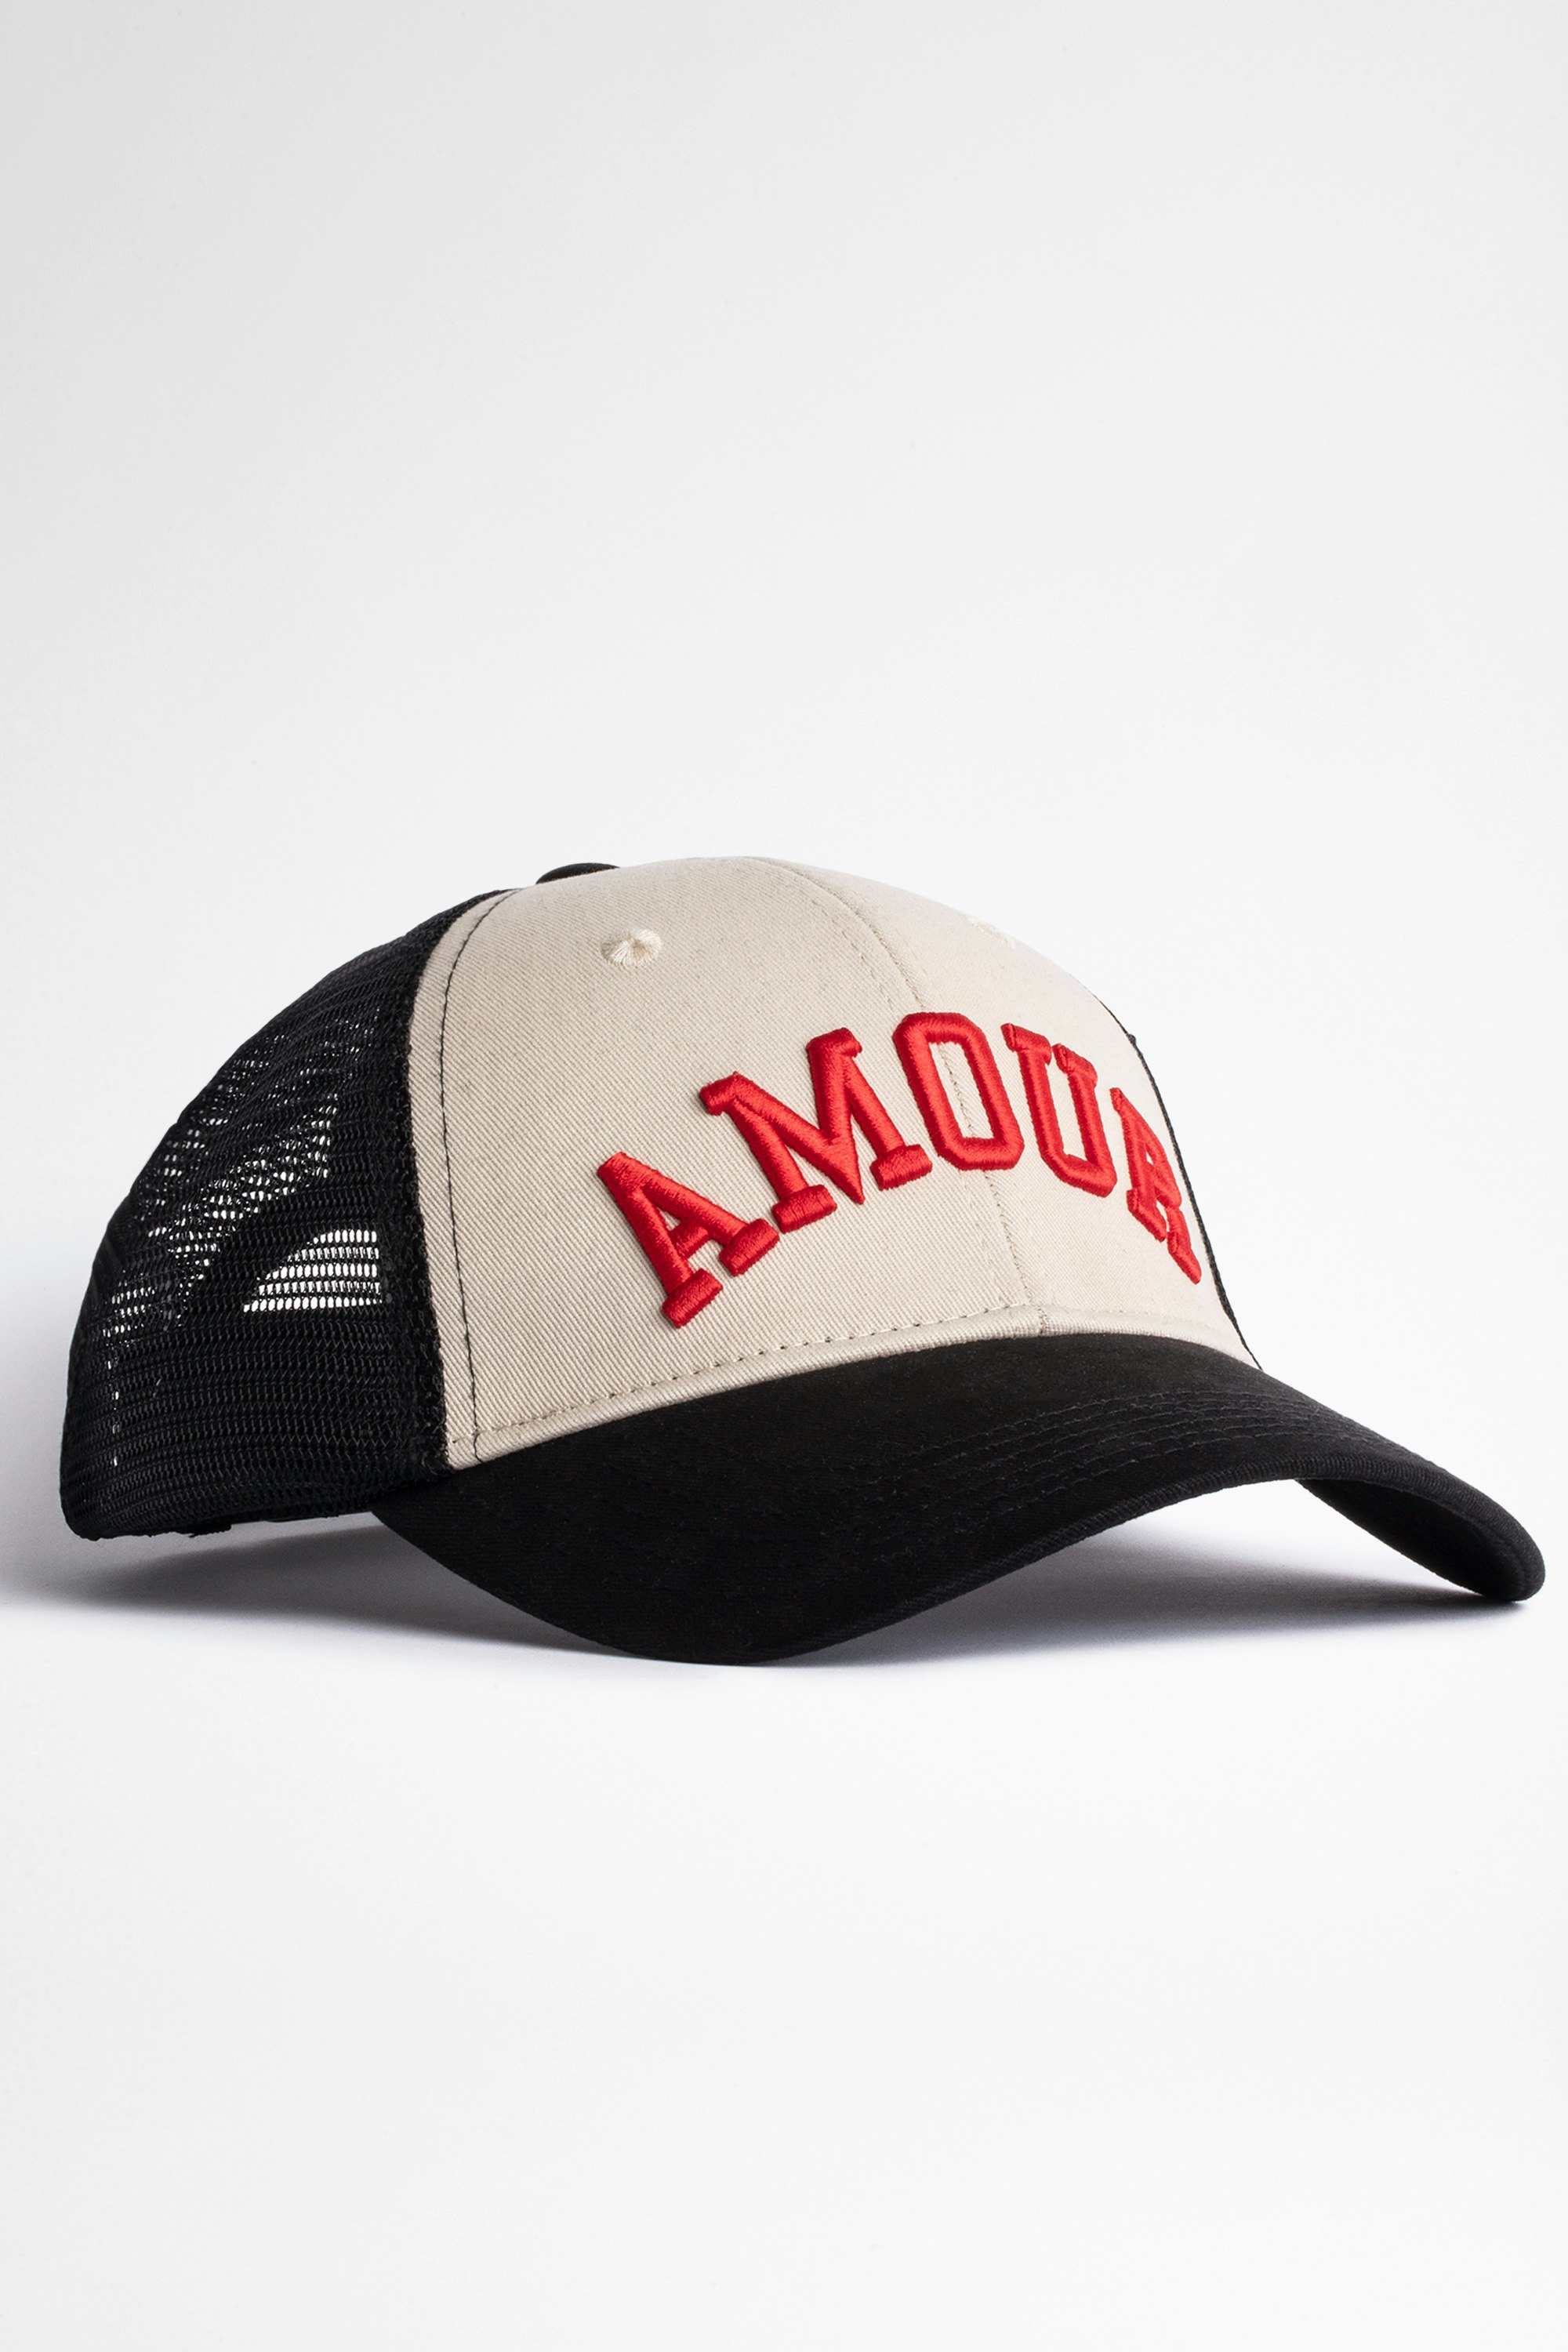 Klelia Amour Cap Women's black cap with AMOUR embroidered in red.